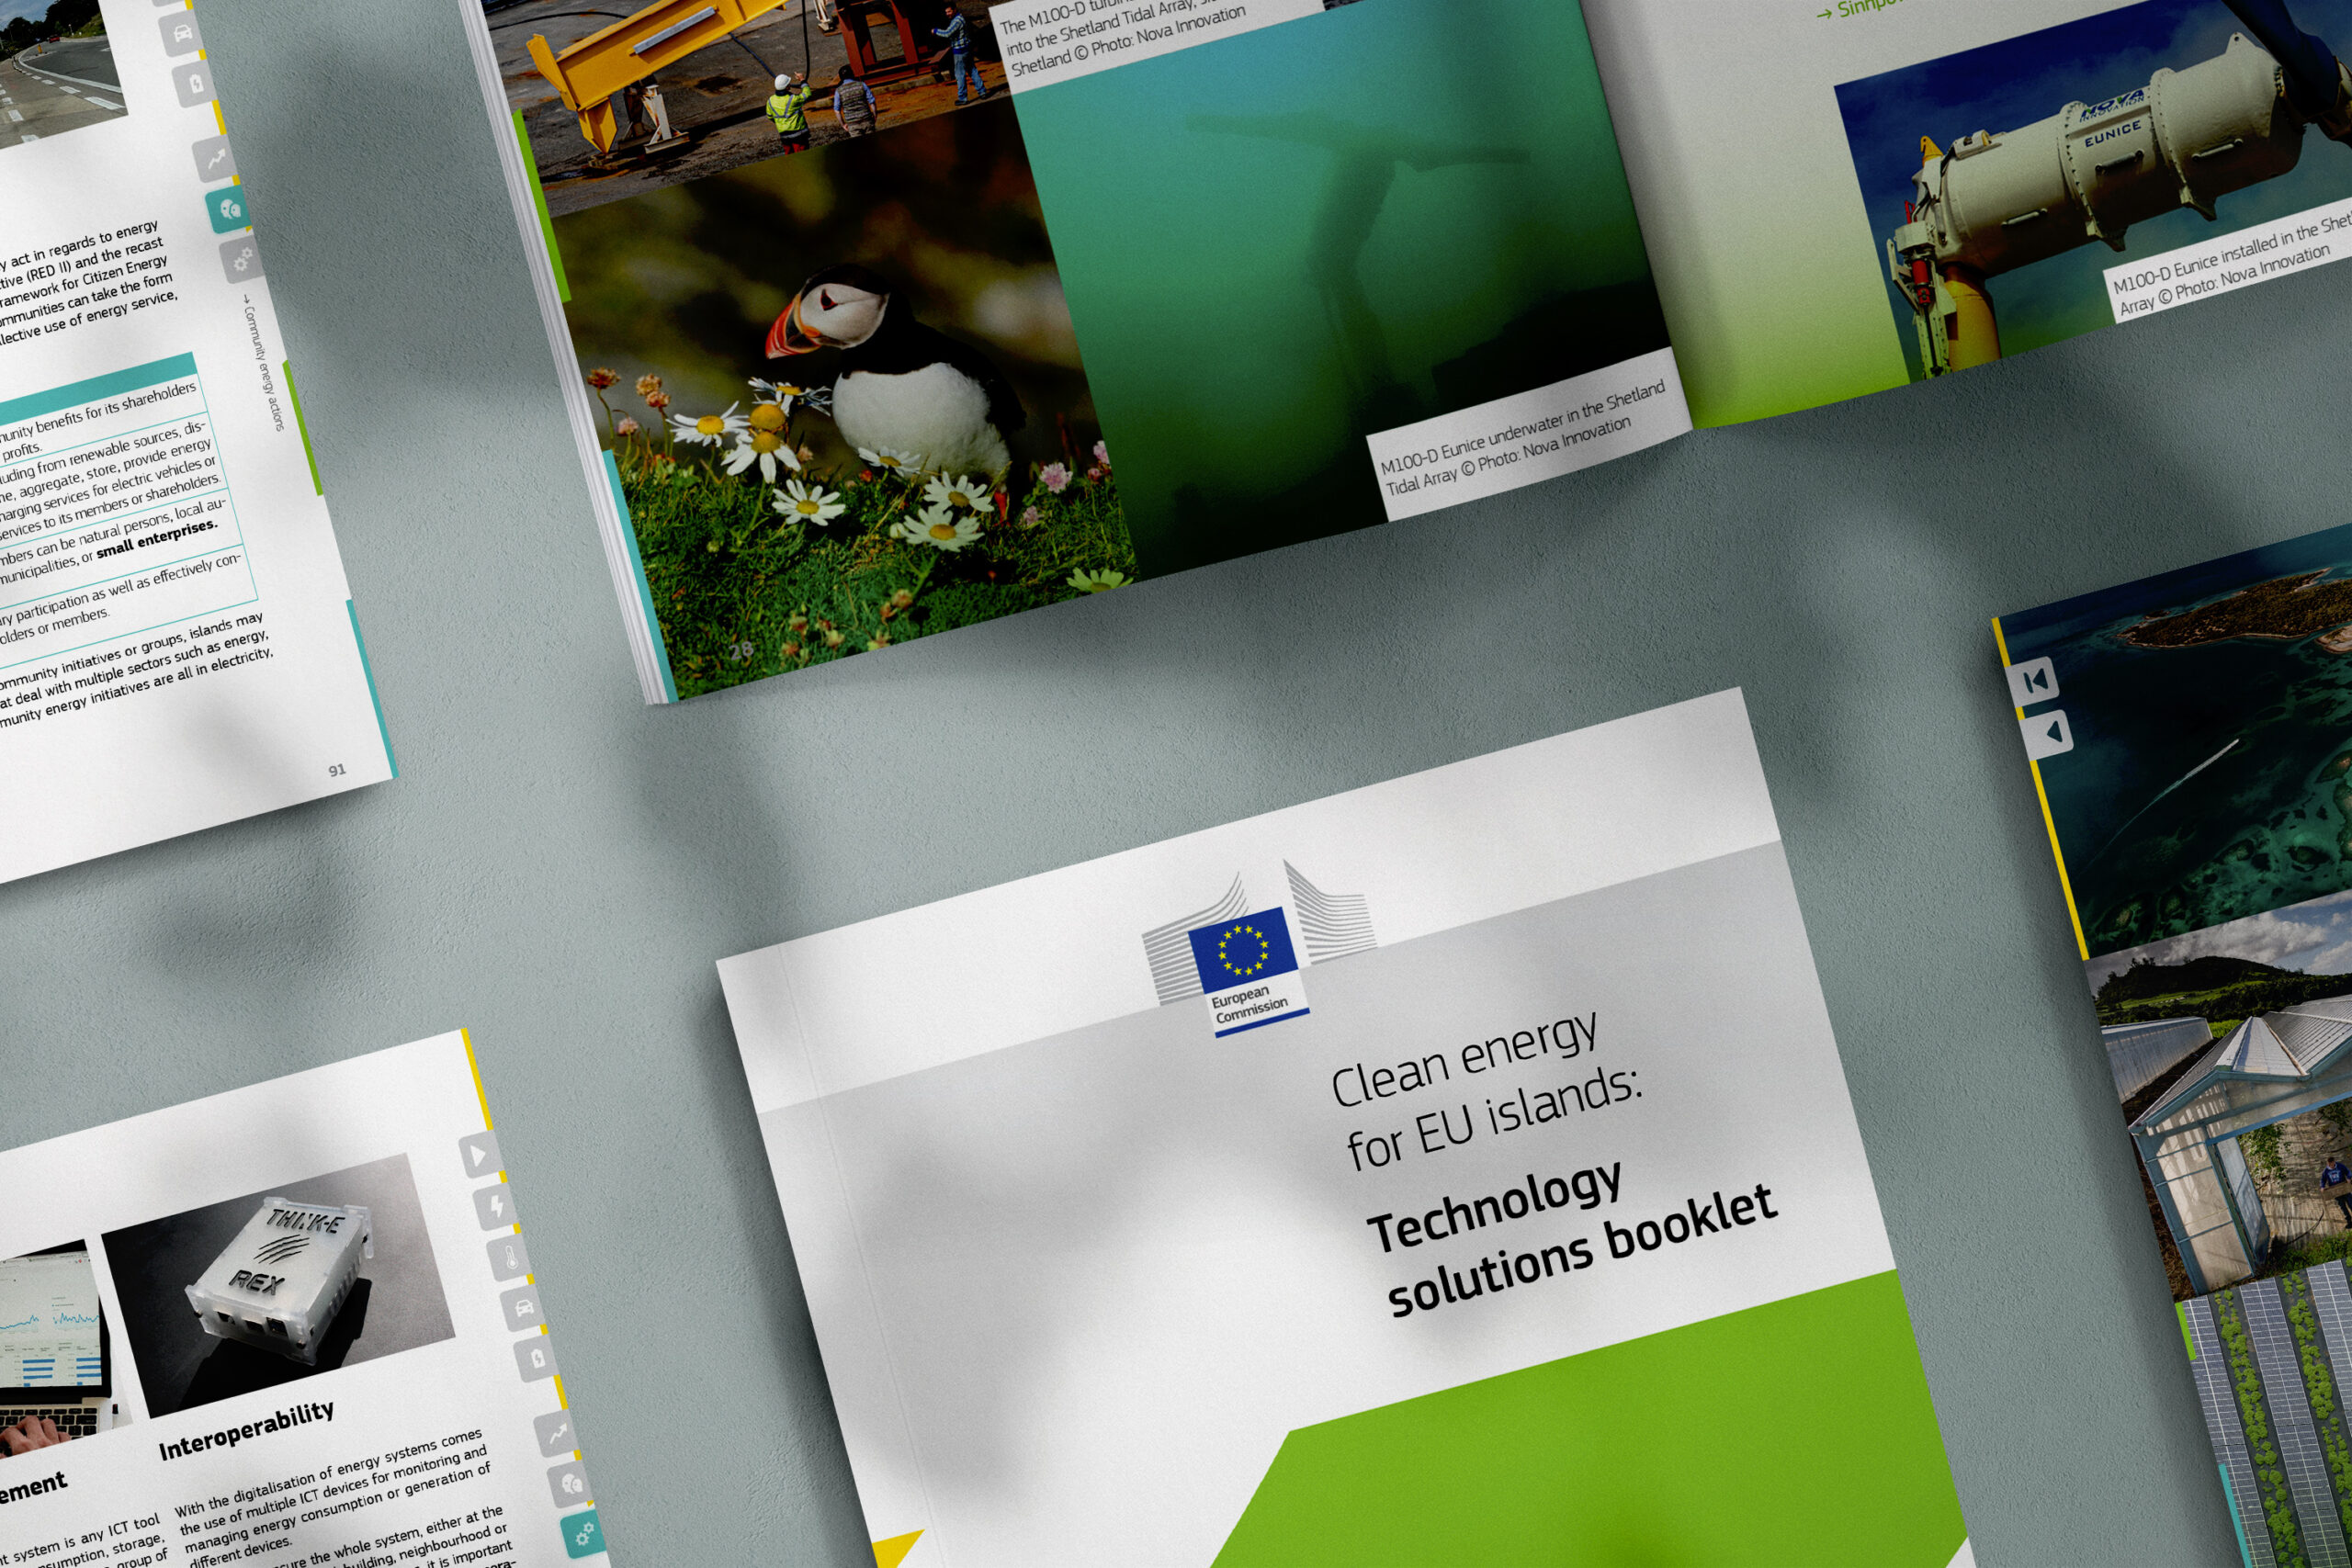 Clean energy for EU island secretariat – The Technology Solutions Booklet